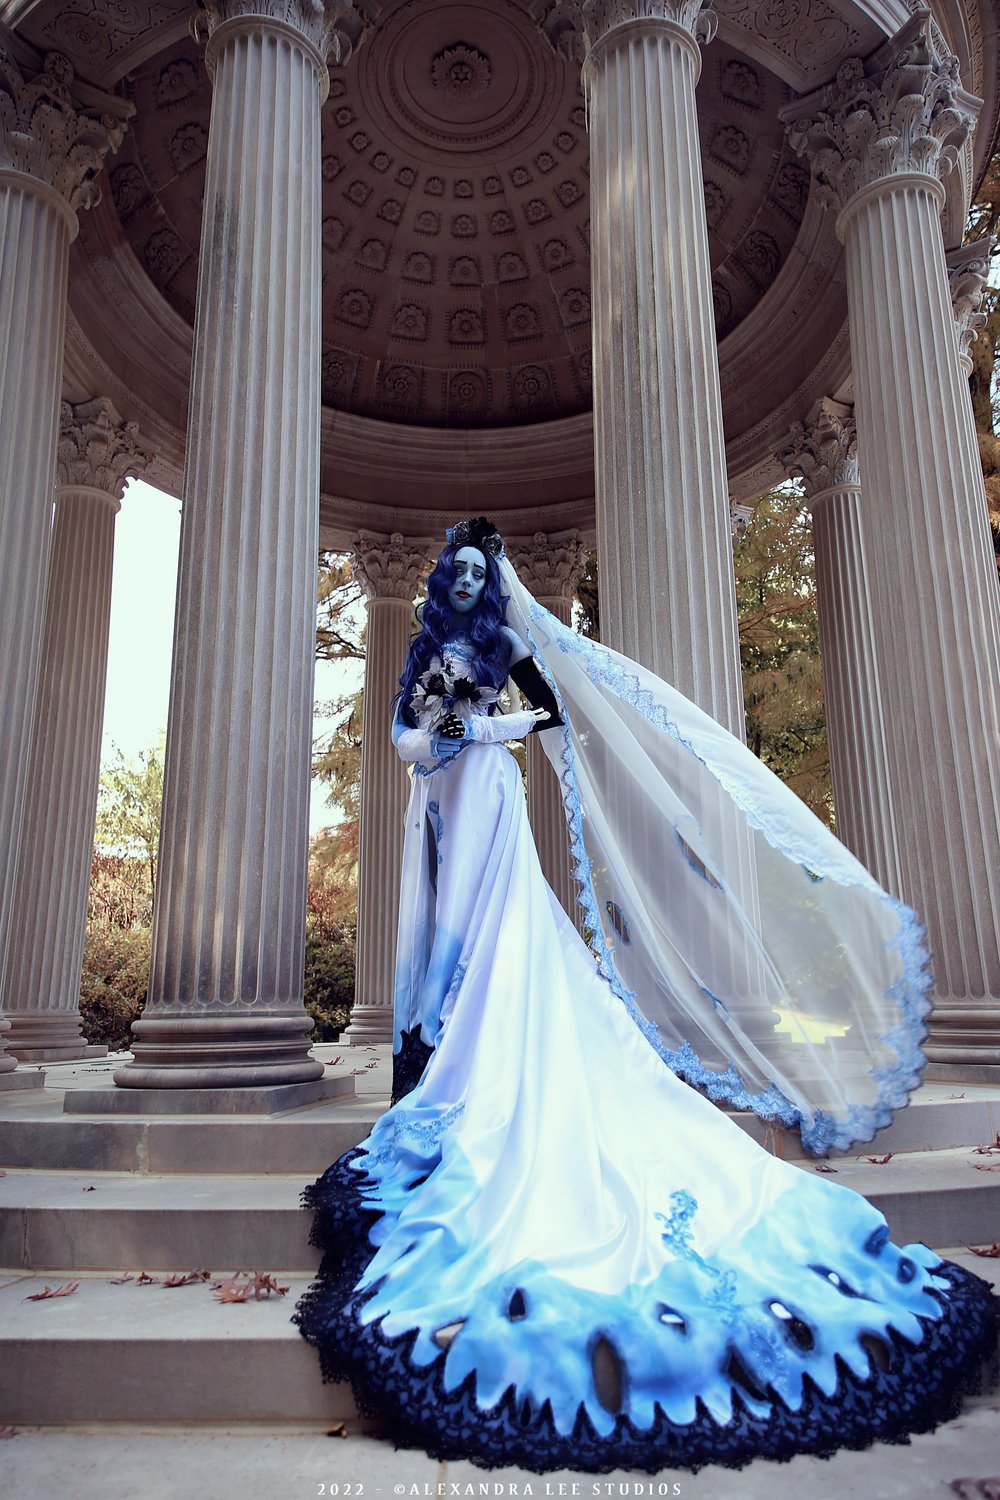 Emily from The Corpse Bride Cosplay Template — Casey Renee Cosplay